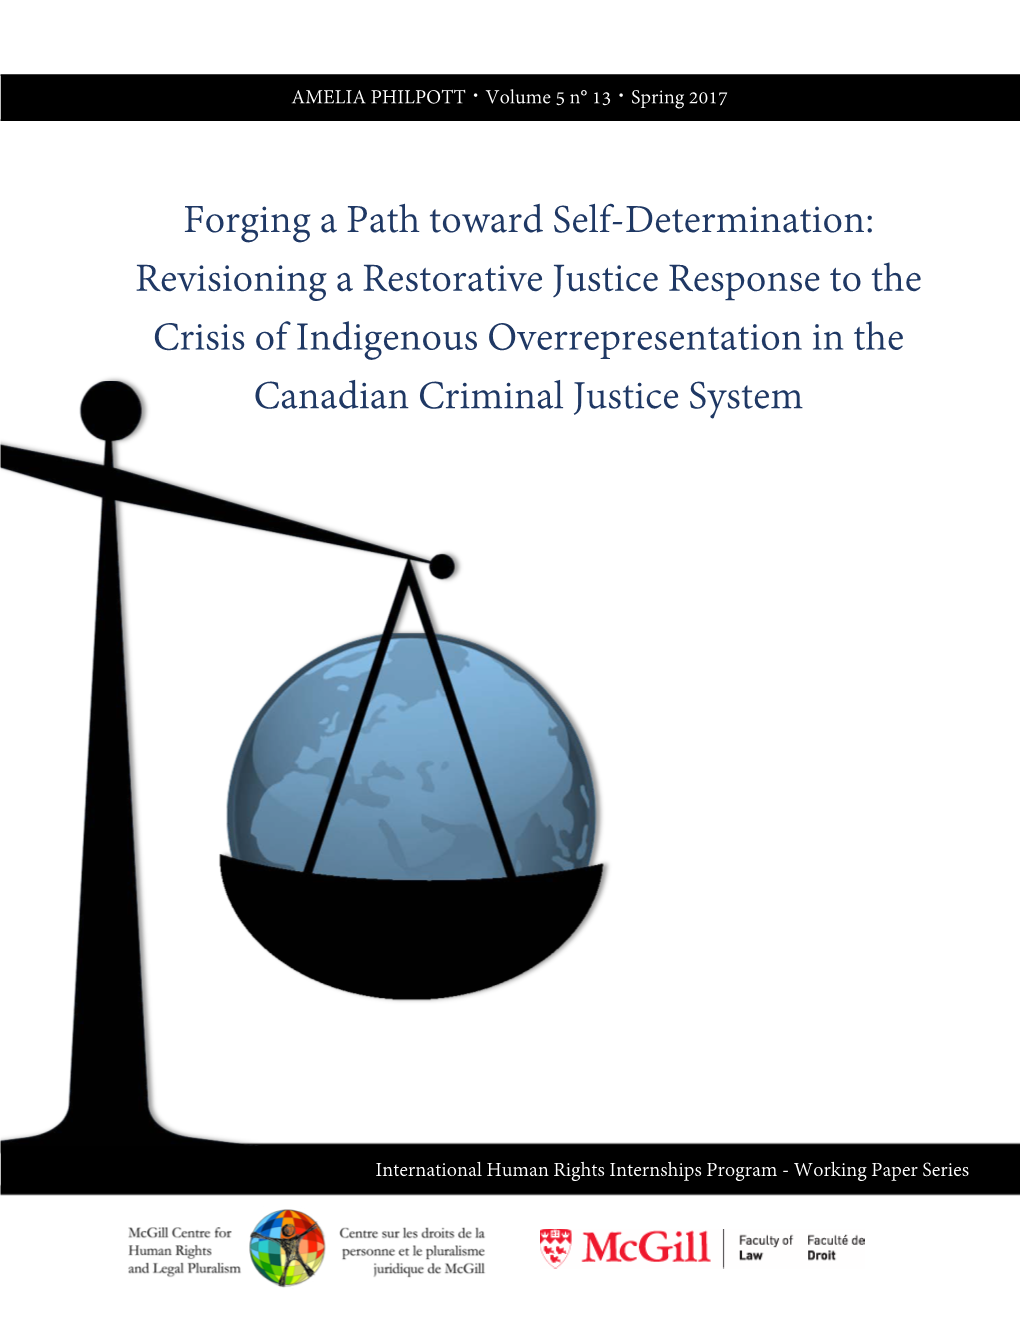 Revisioning a Restorative Justice Response to the Crisis of Indigenous Overrepresentation in The